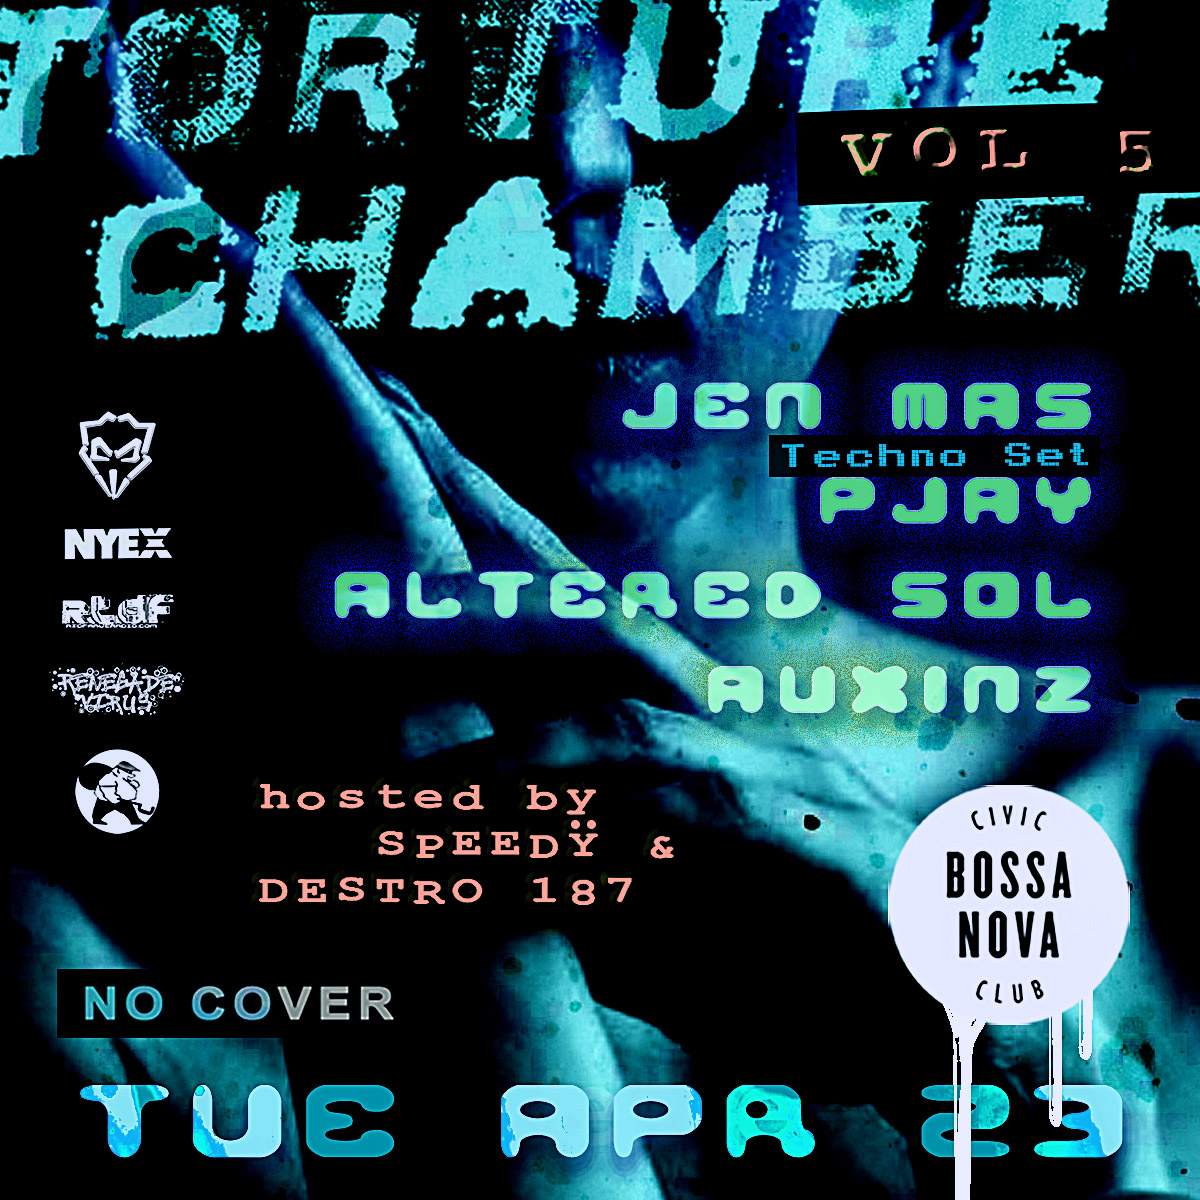 TORTURE CHAMBER Vol 5 - Jen Mas, Pjay, Altered Sol, Auxins; hosted by The Usual Suspects - フライヤー表